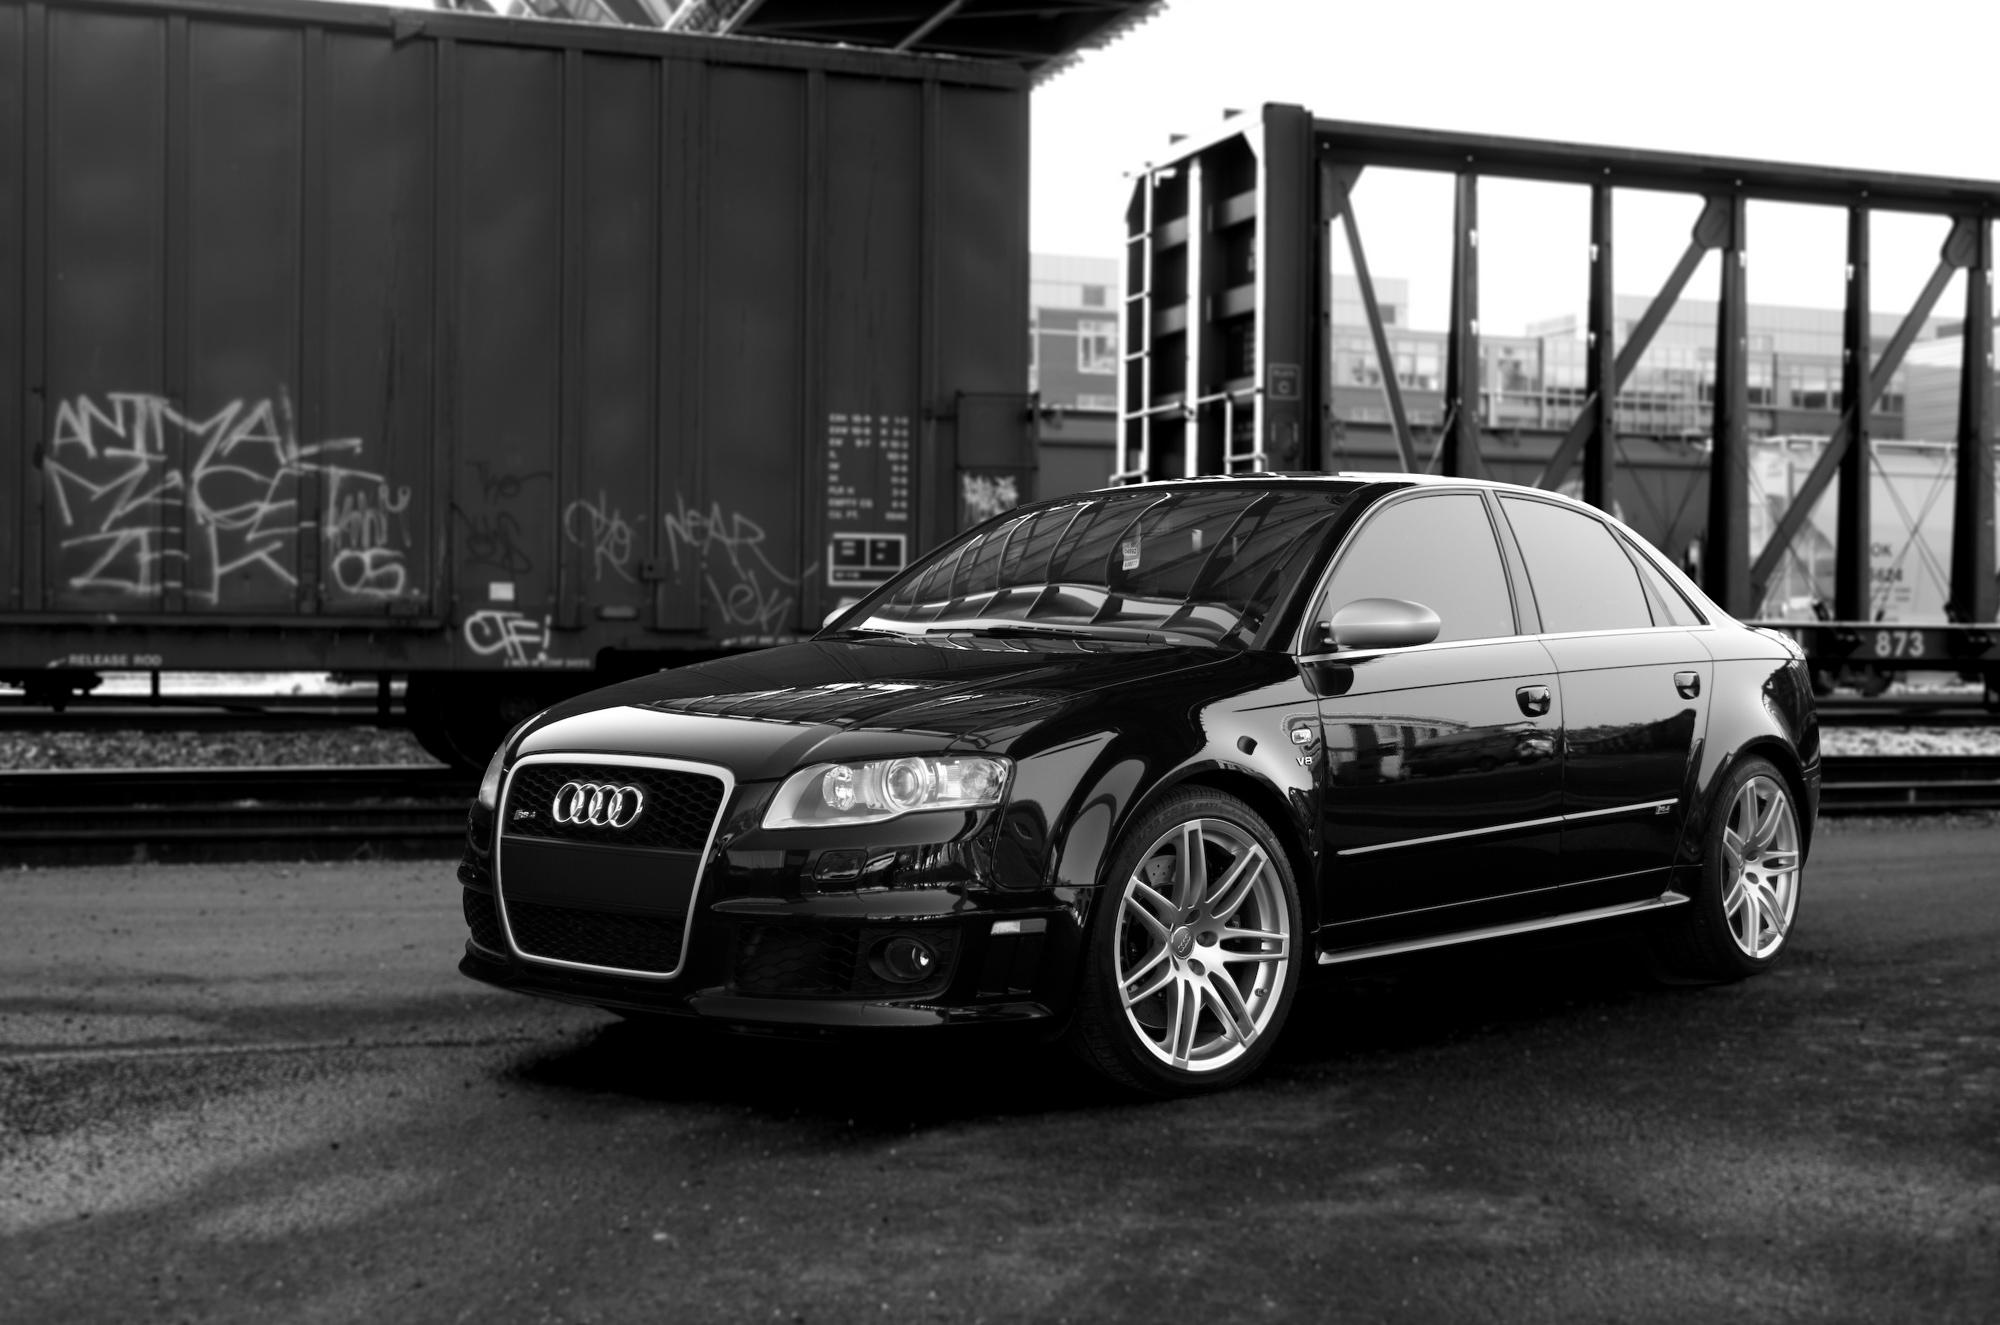 Audi RS4 HD Wallpaper, Background Image